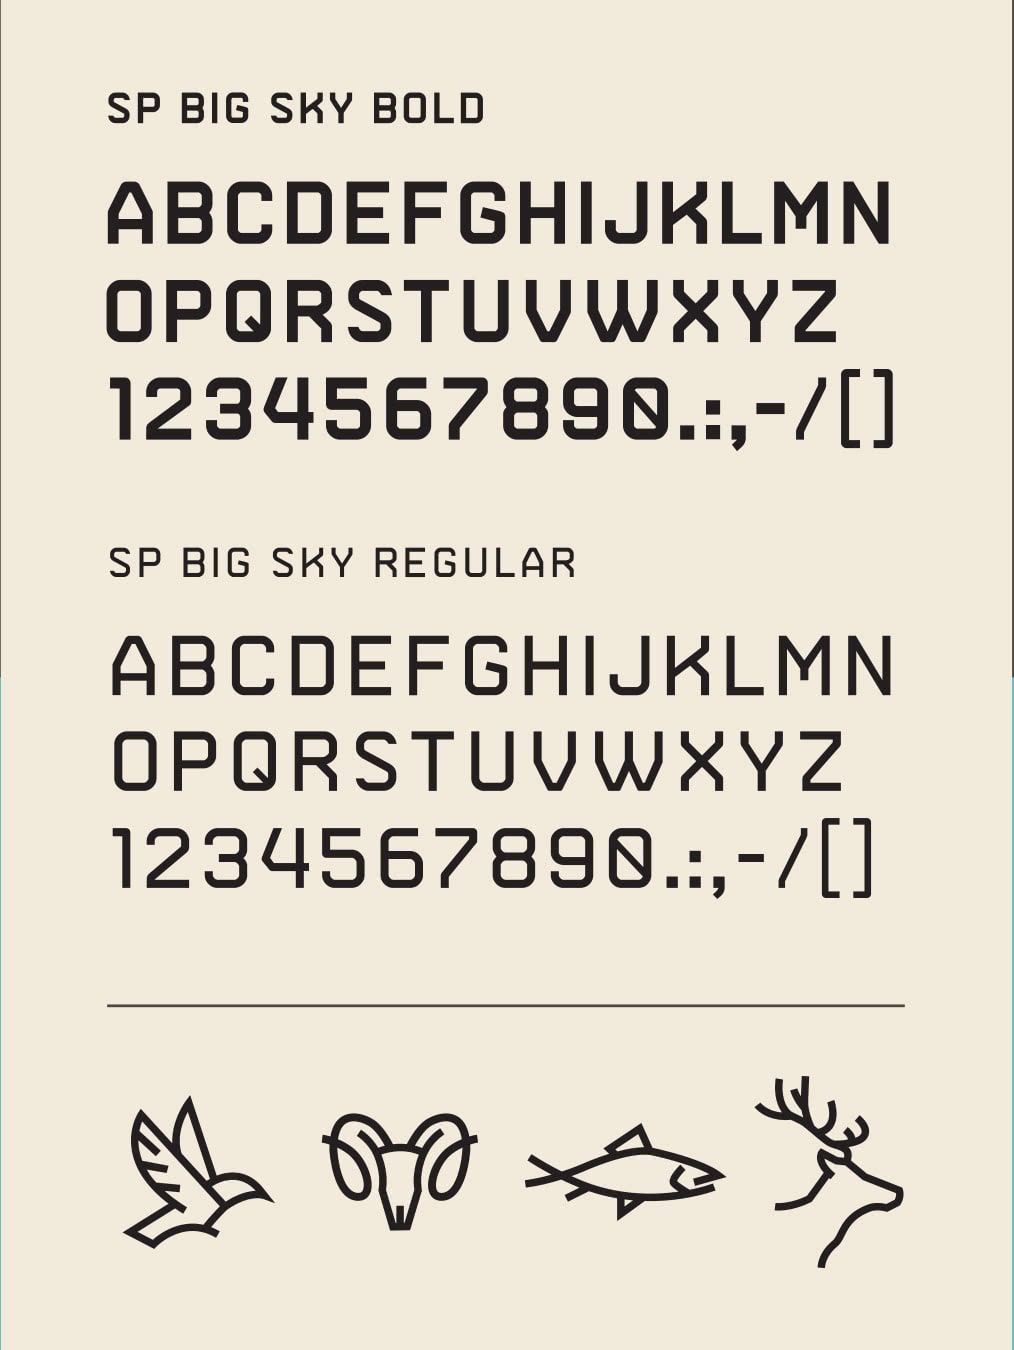 Spanish Peaks Mountain Club typeface design and icons